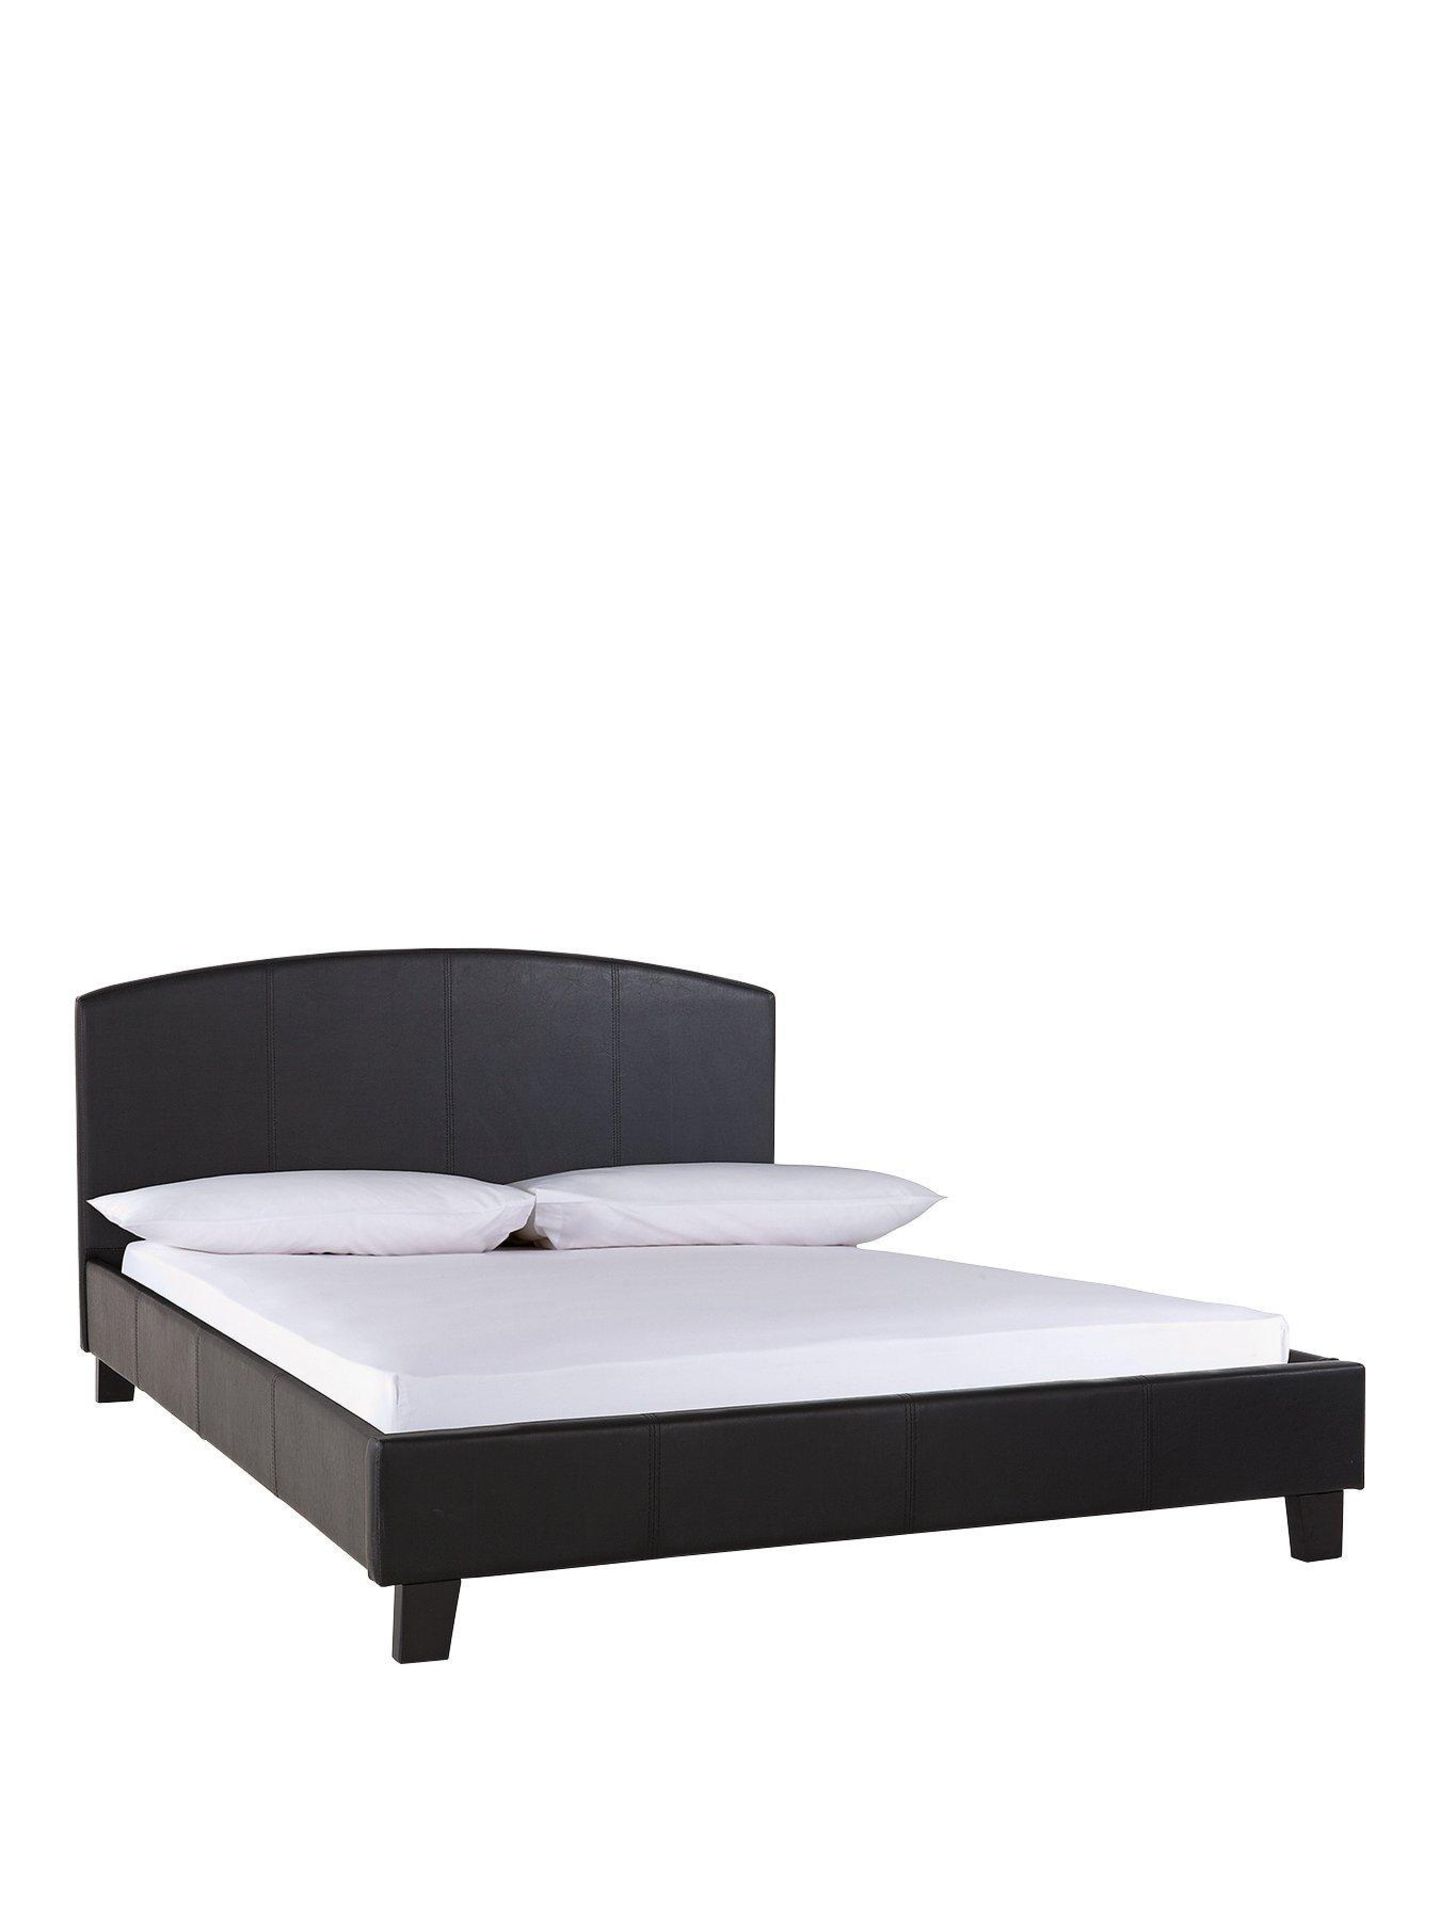 Boxed Item Marston Small Double Bed [Black] 88X135X202Cm rrp, £298.0